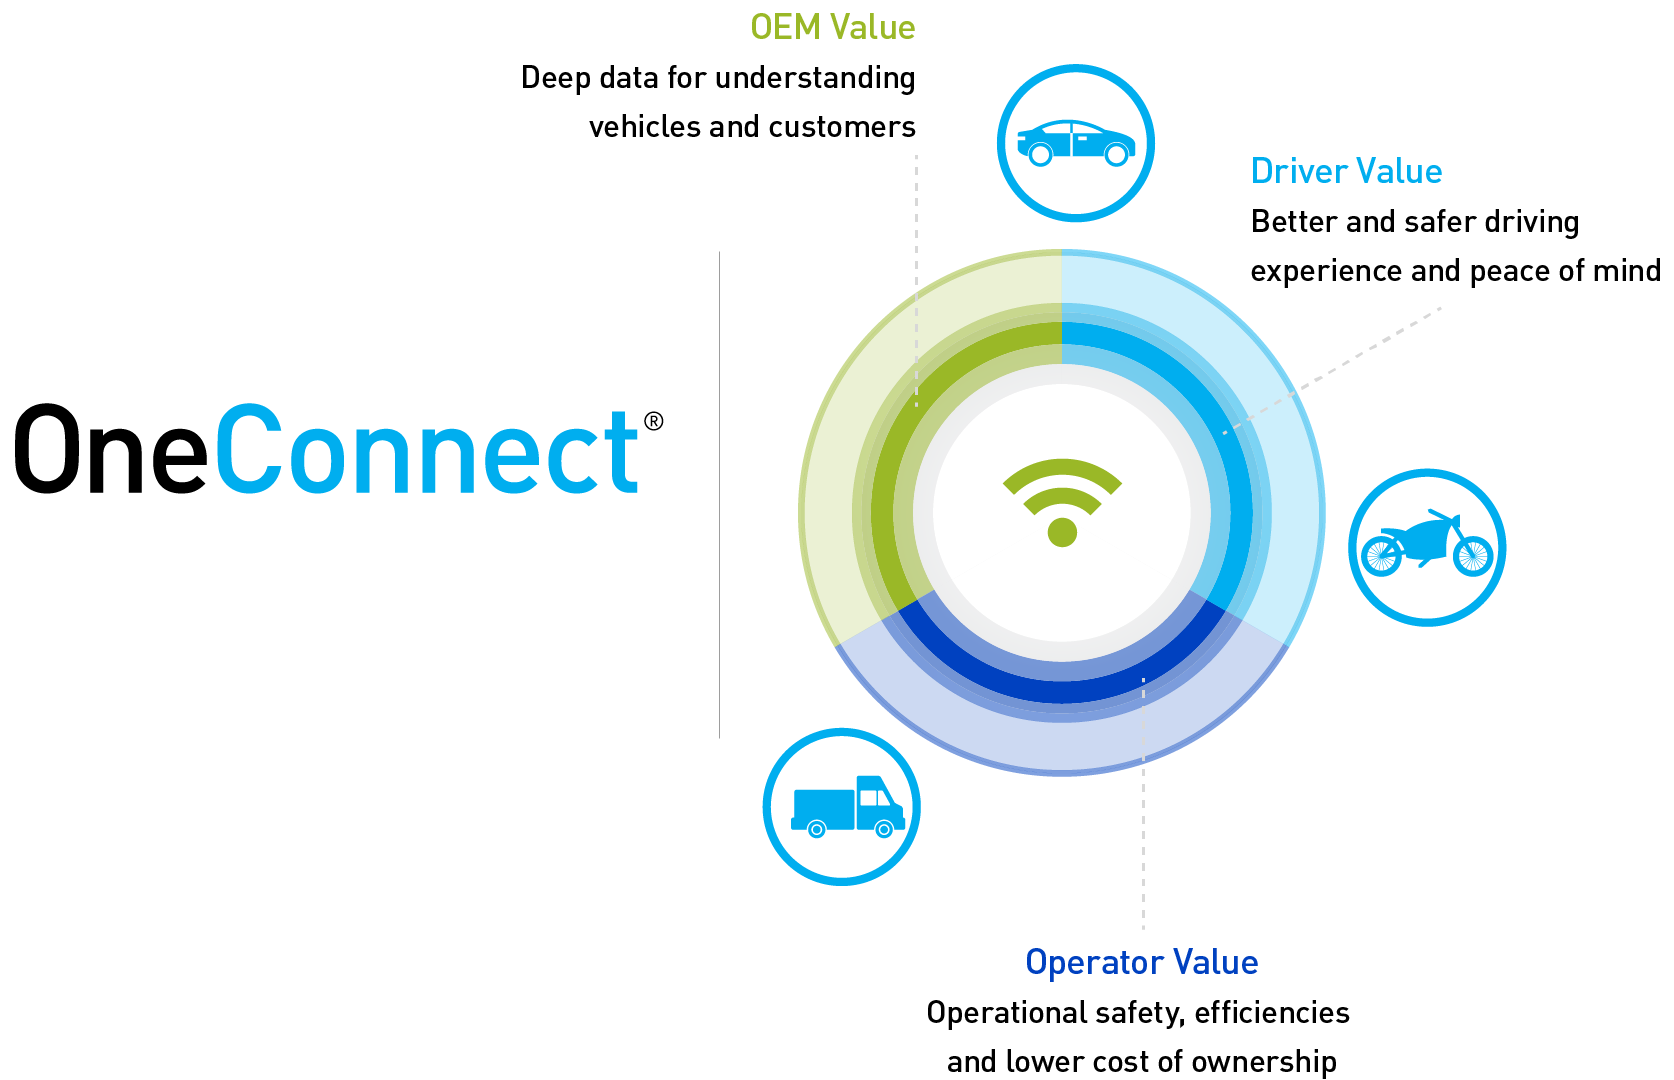 OneConnect creates value for OEMs, drivers and fleet operators